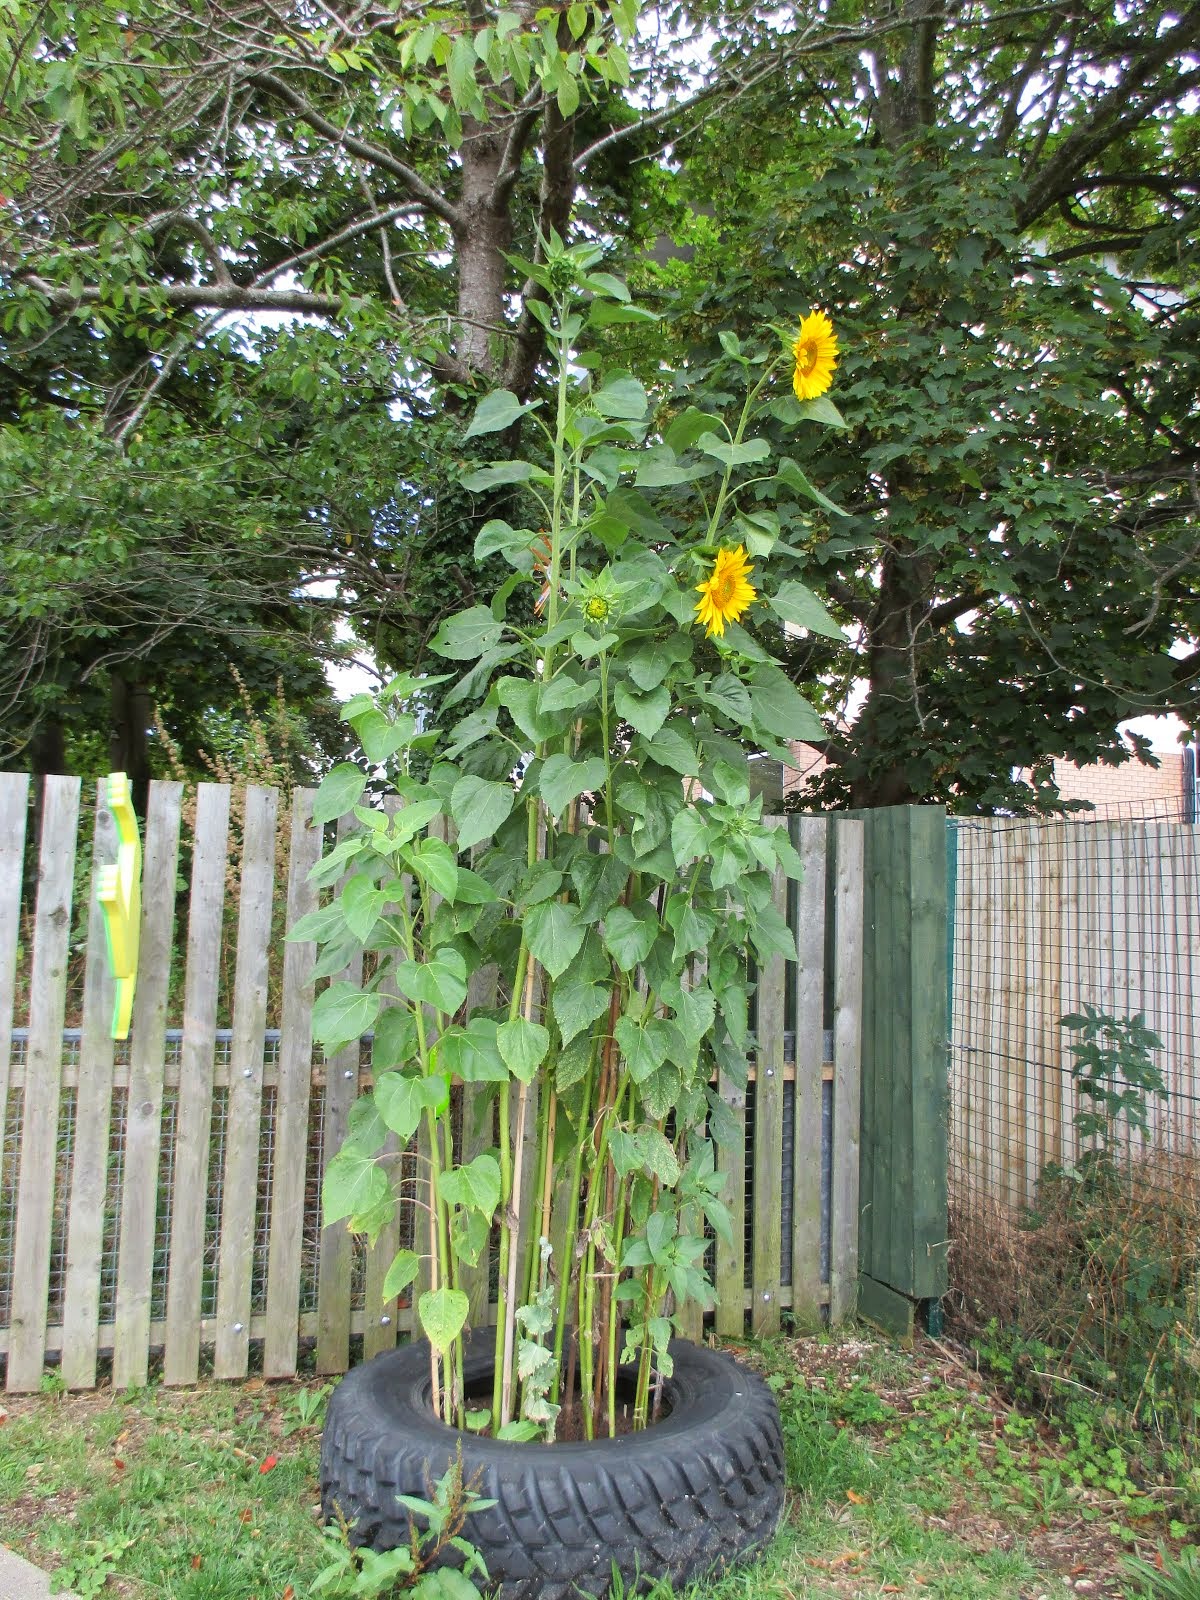 Our Sunflowers!